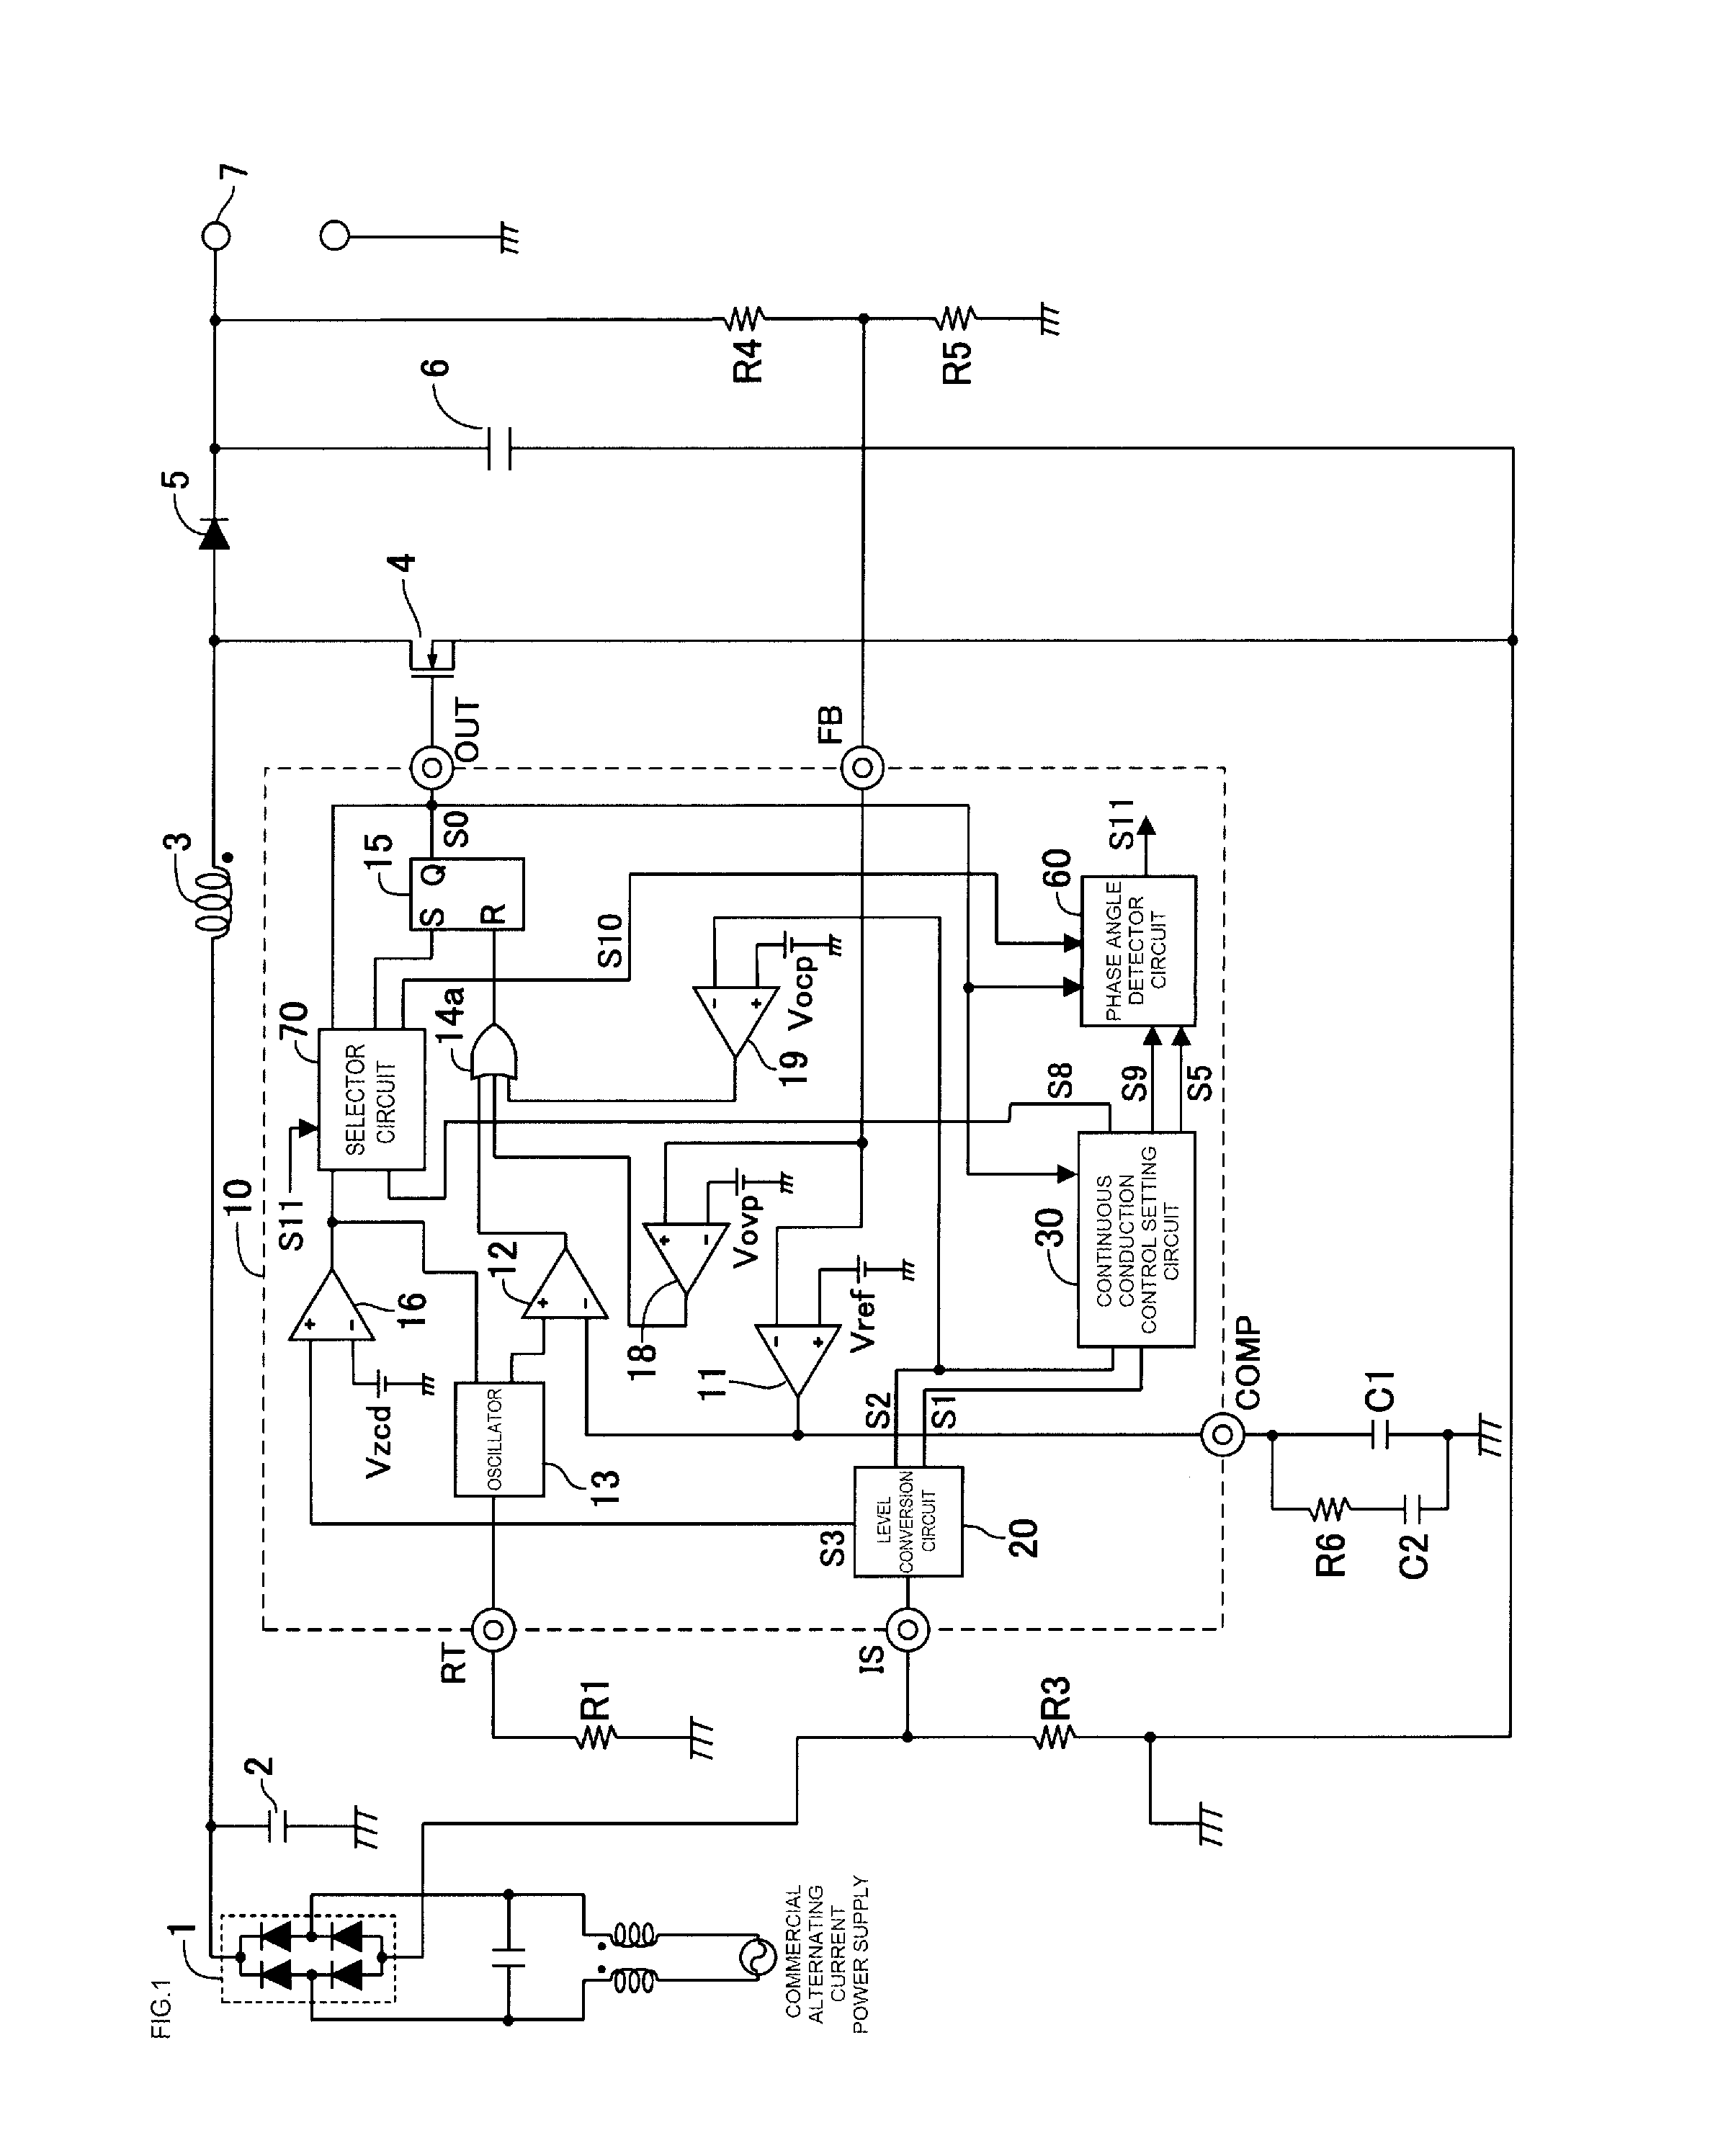 Switching power supply circuit and power factor correction circuit